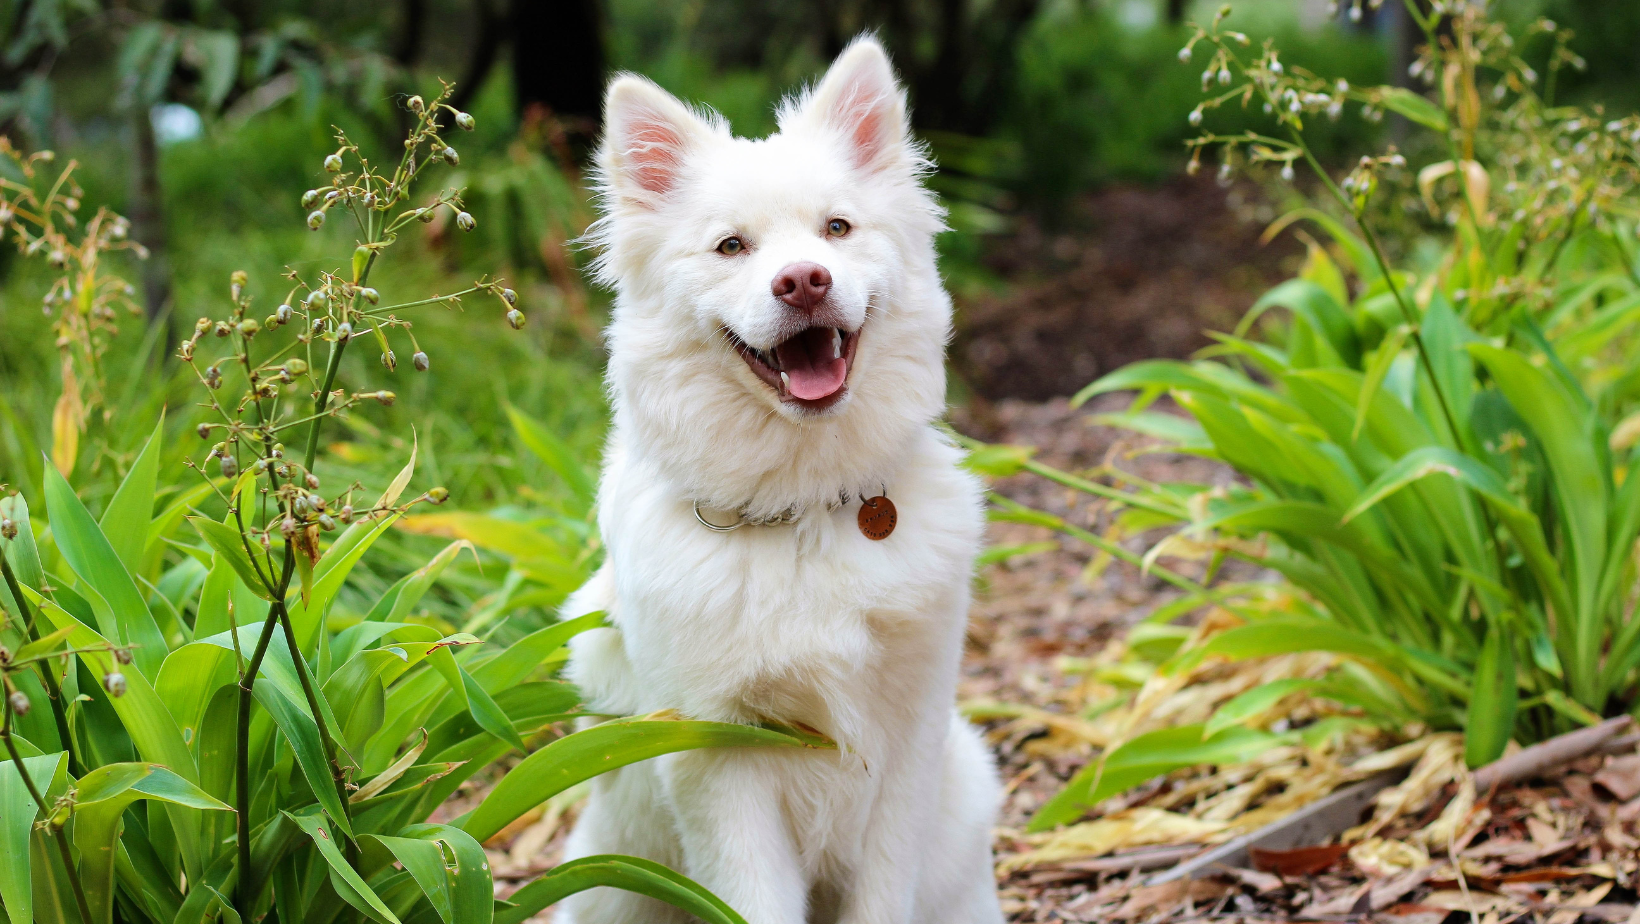 The Ultimate Guide to Looking After Your Dog: Tips for Healthy, Happy Pups